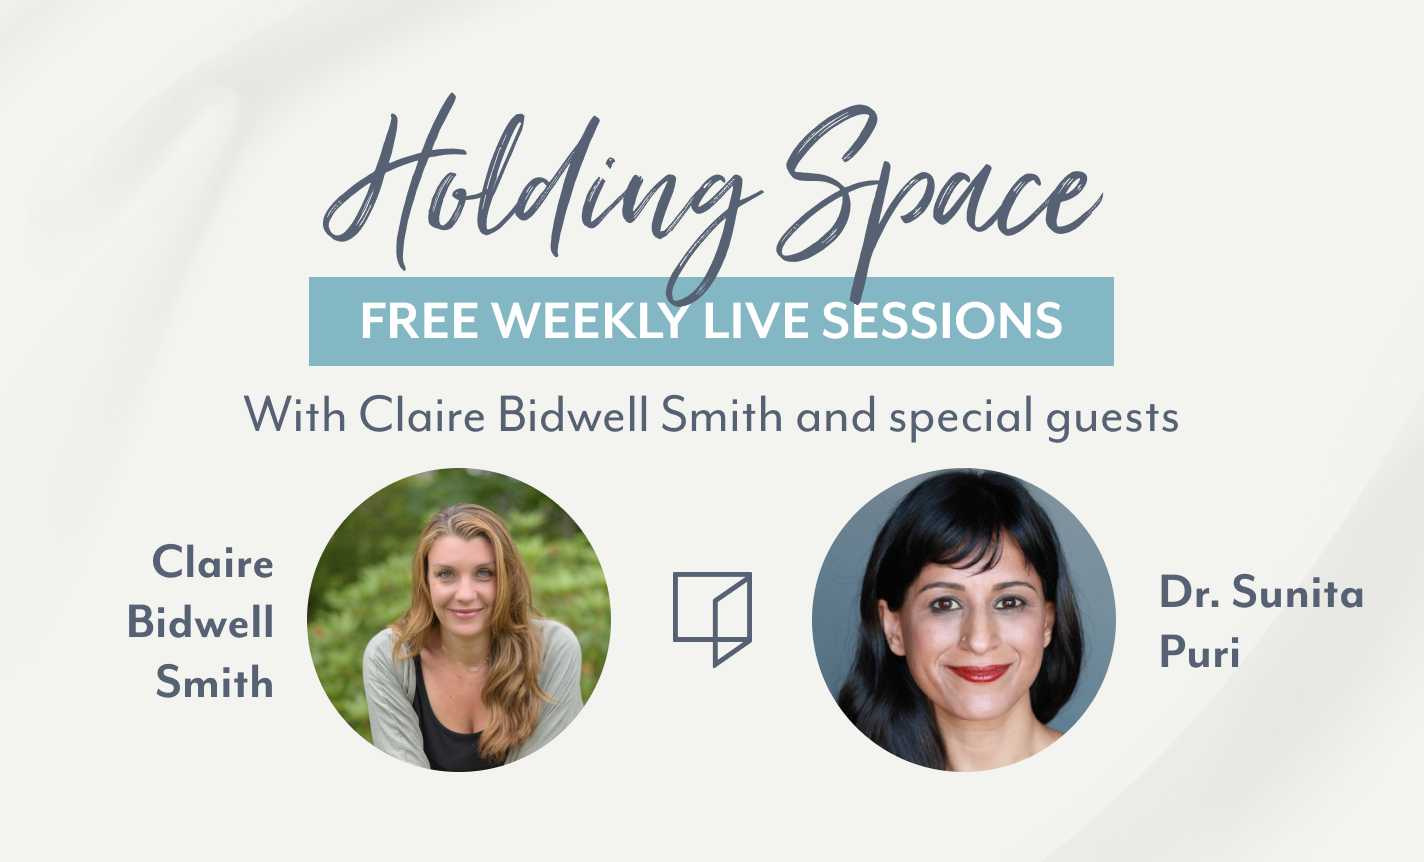 Holding Steady with Claire Bidwell Smith and Sunita Puri